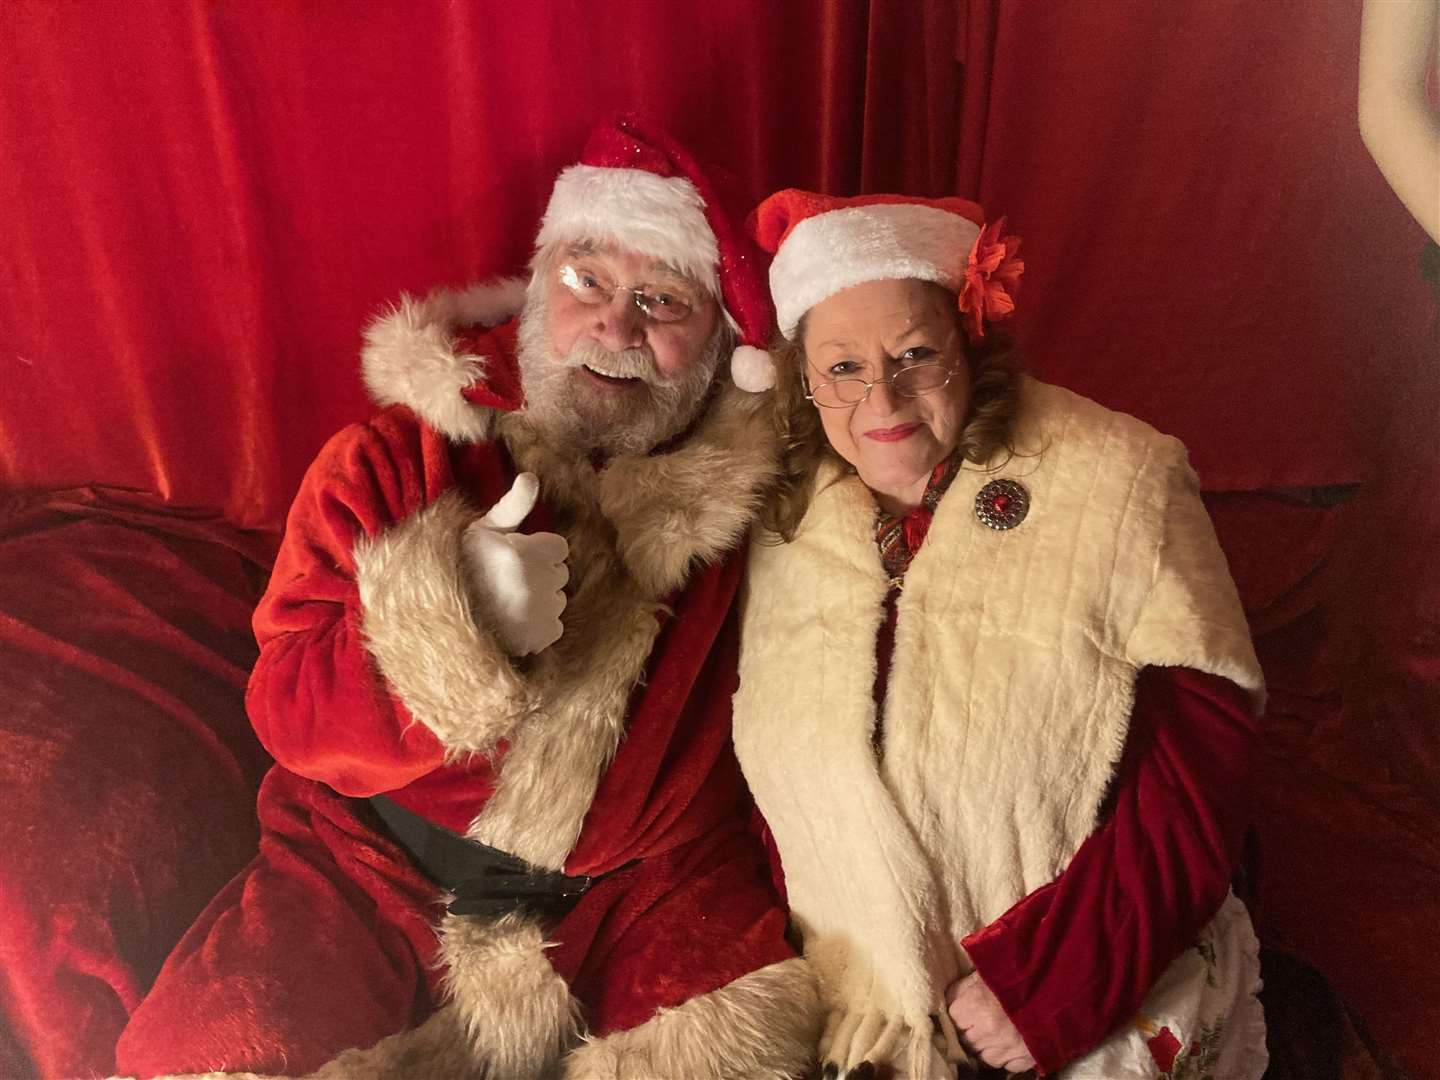 James Enright and his daughter, Sue Percival, as Father and Mother Christmas